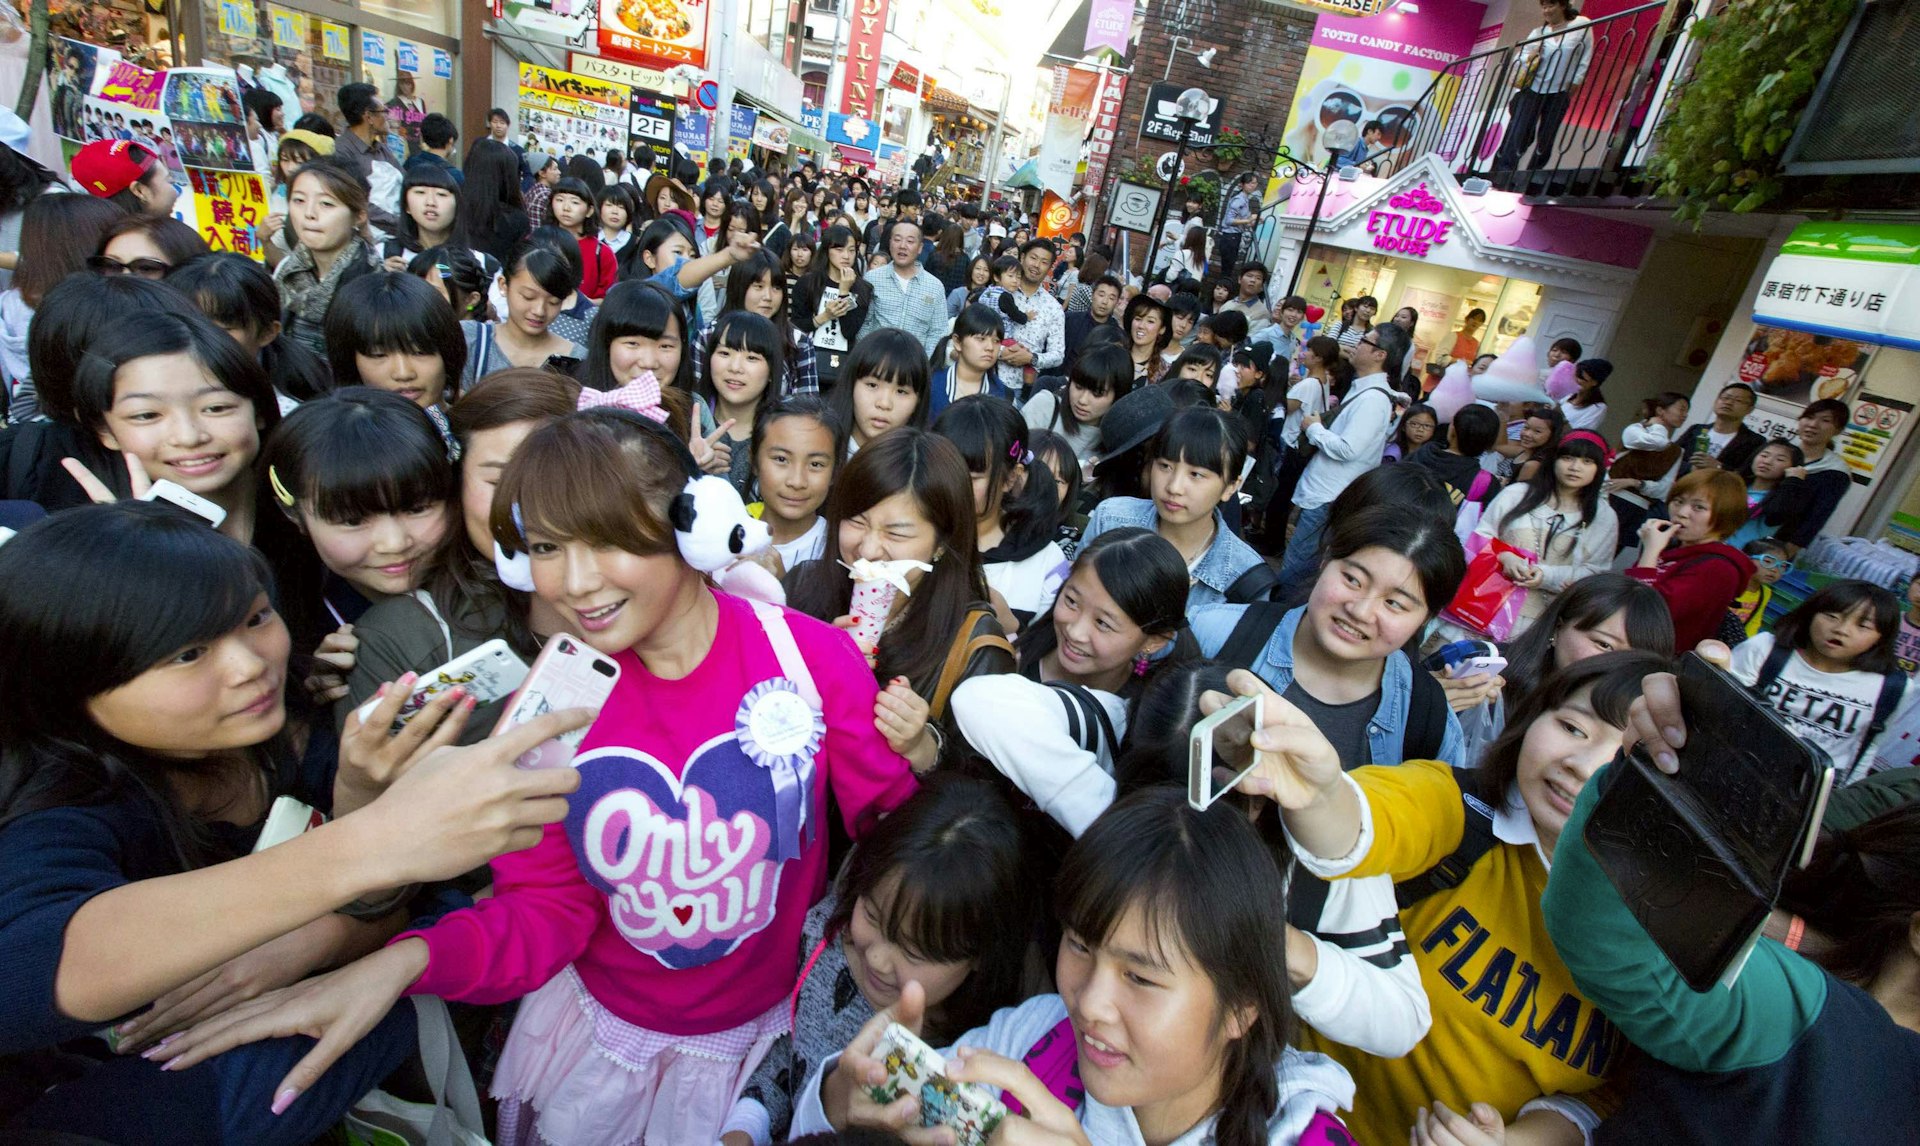 Ai Haruna surrounded by fans in Harajuku, a street popular with teenagers in Tokyo.